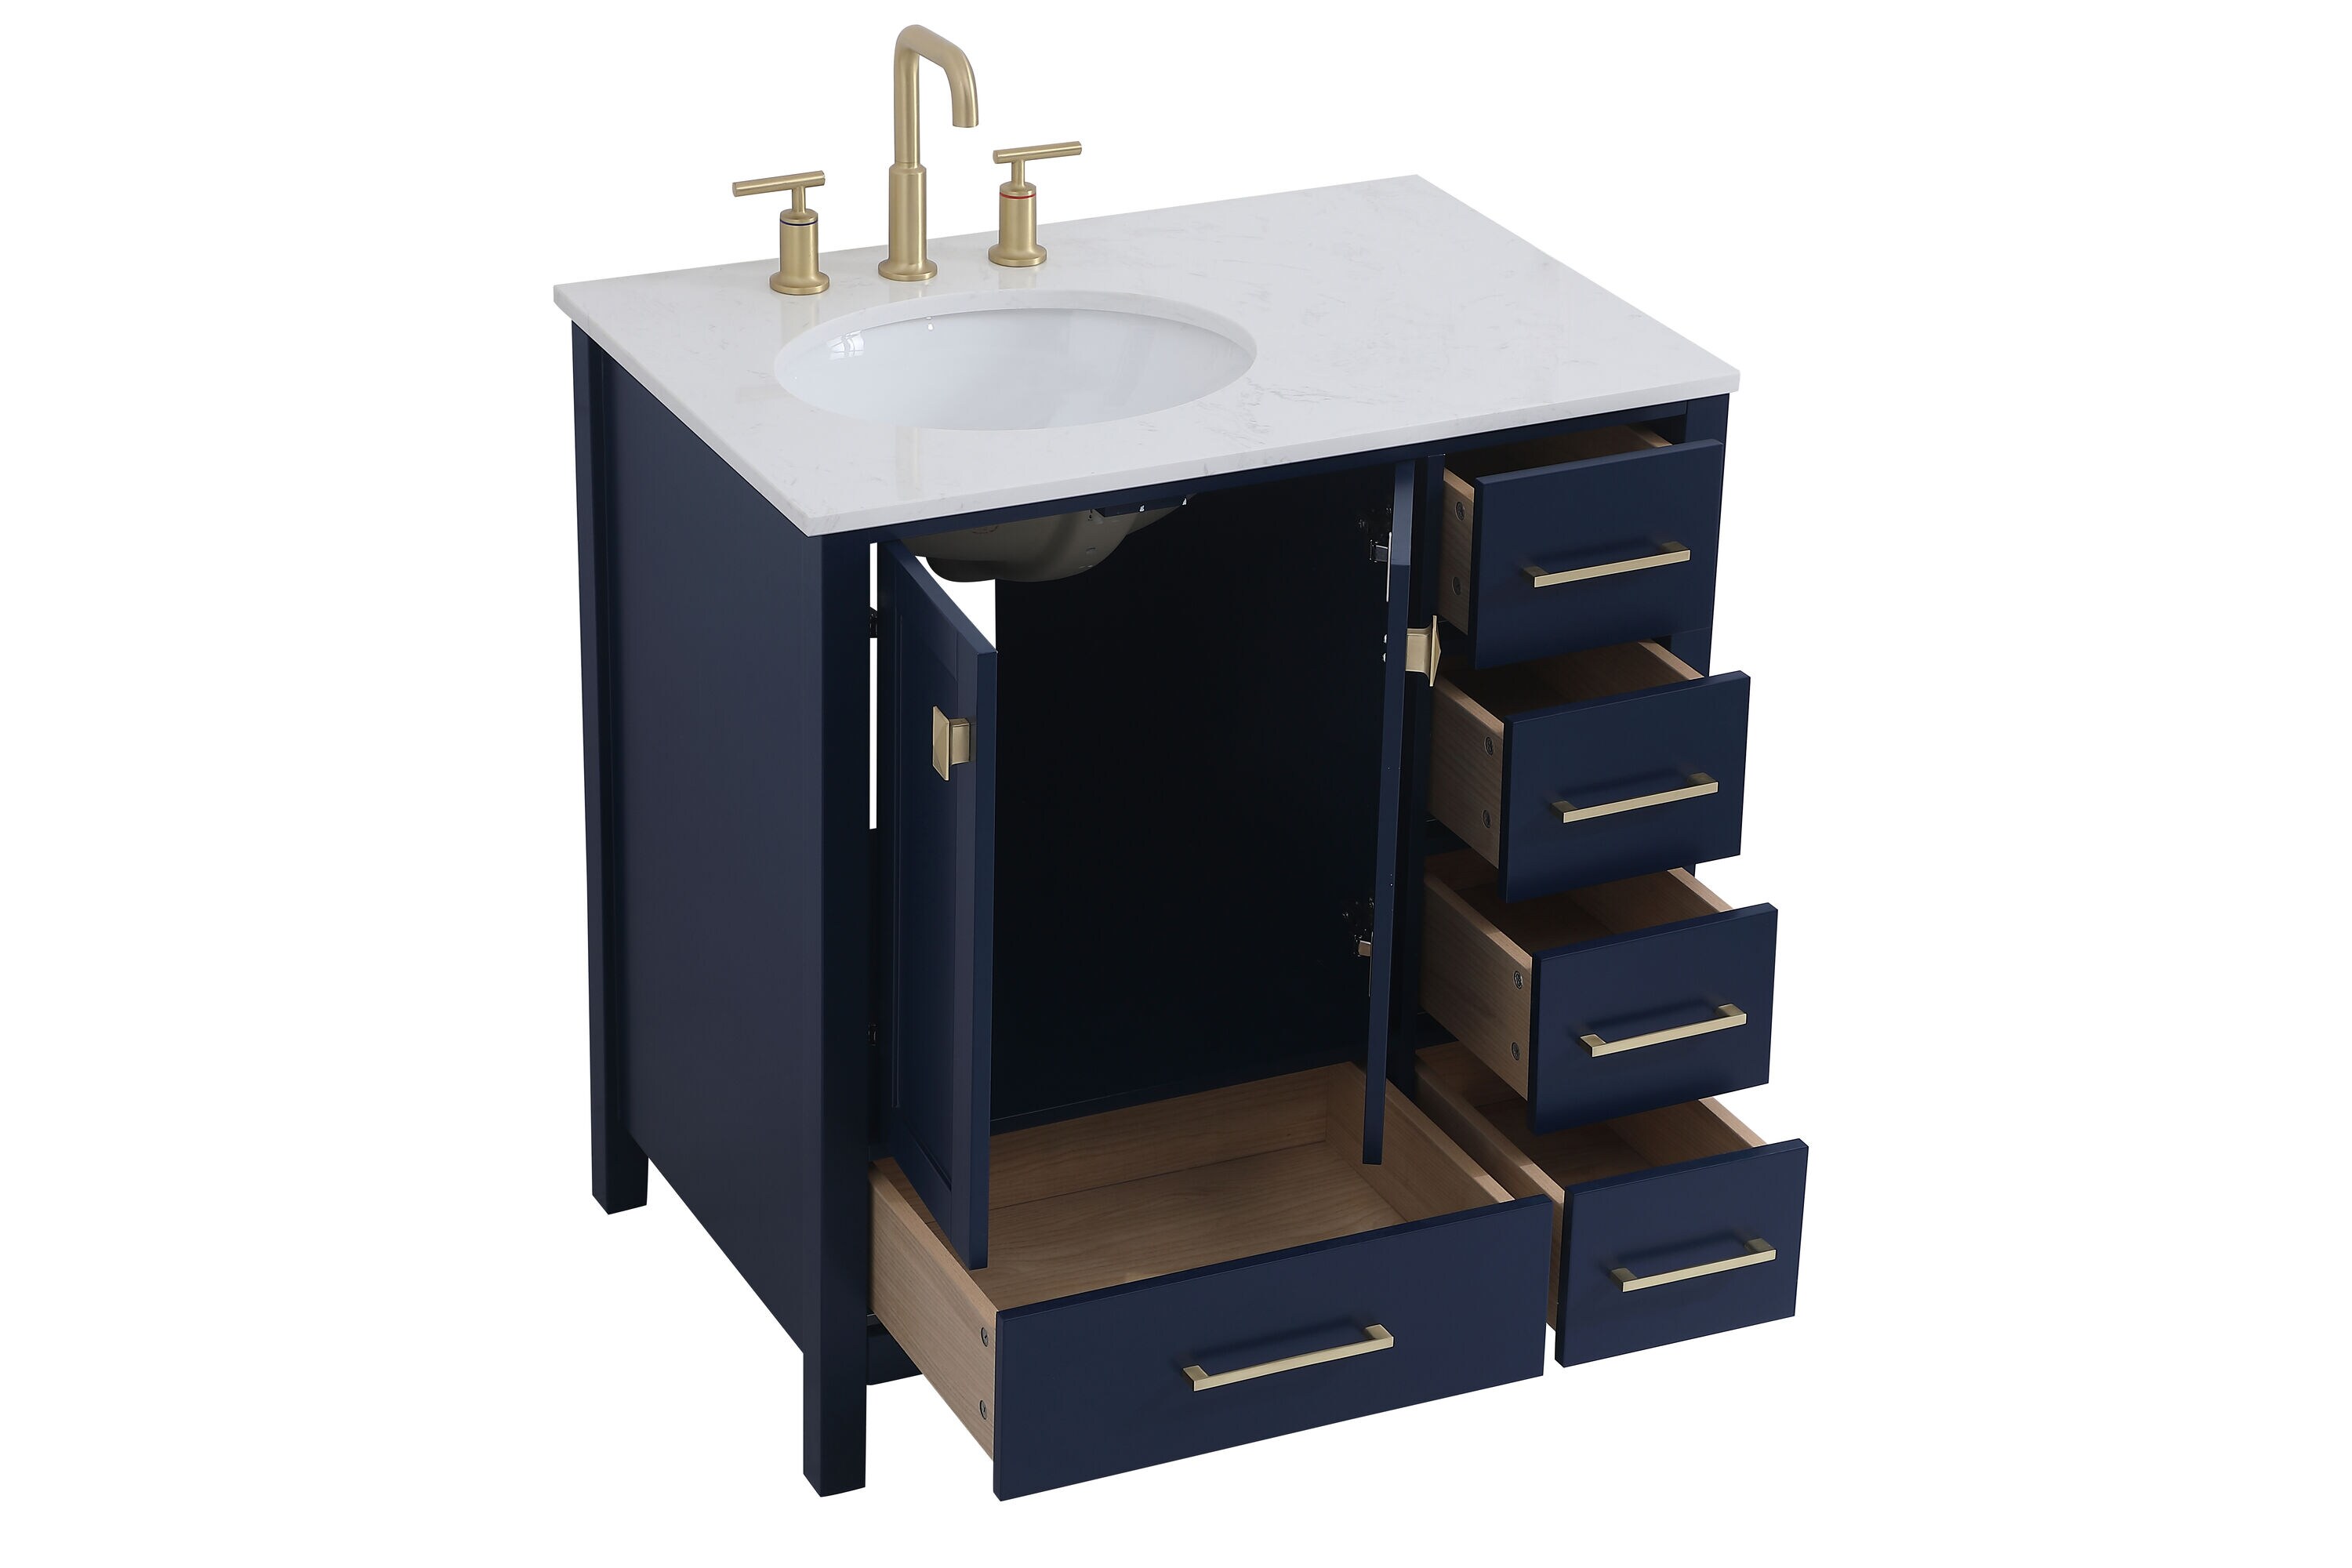 SONAR is the sophisticated and elegant bathroom collection